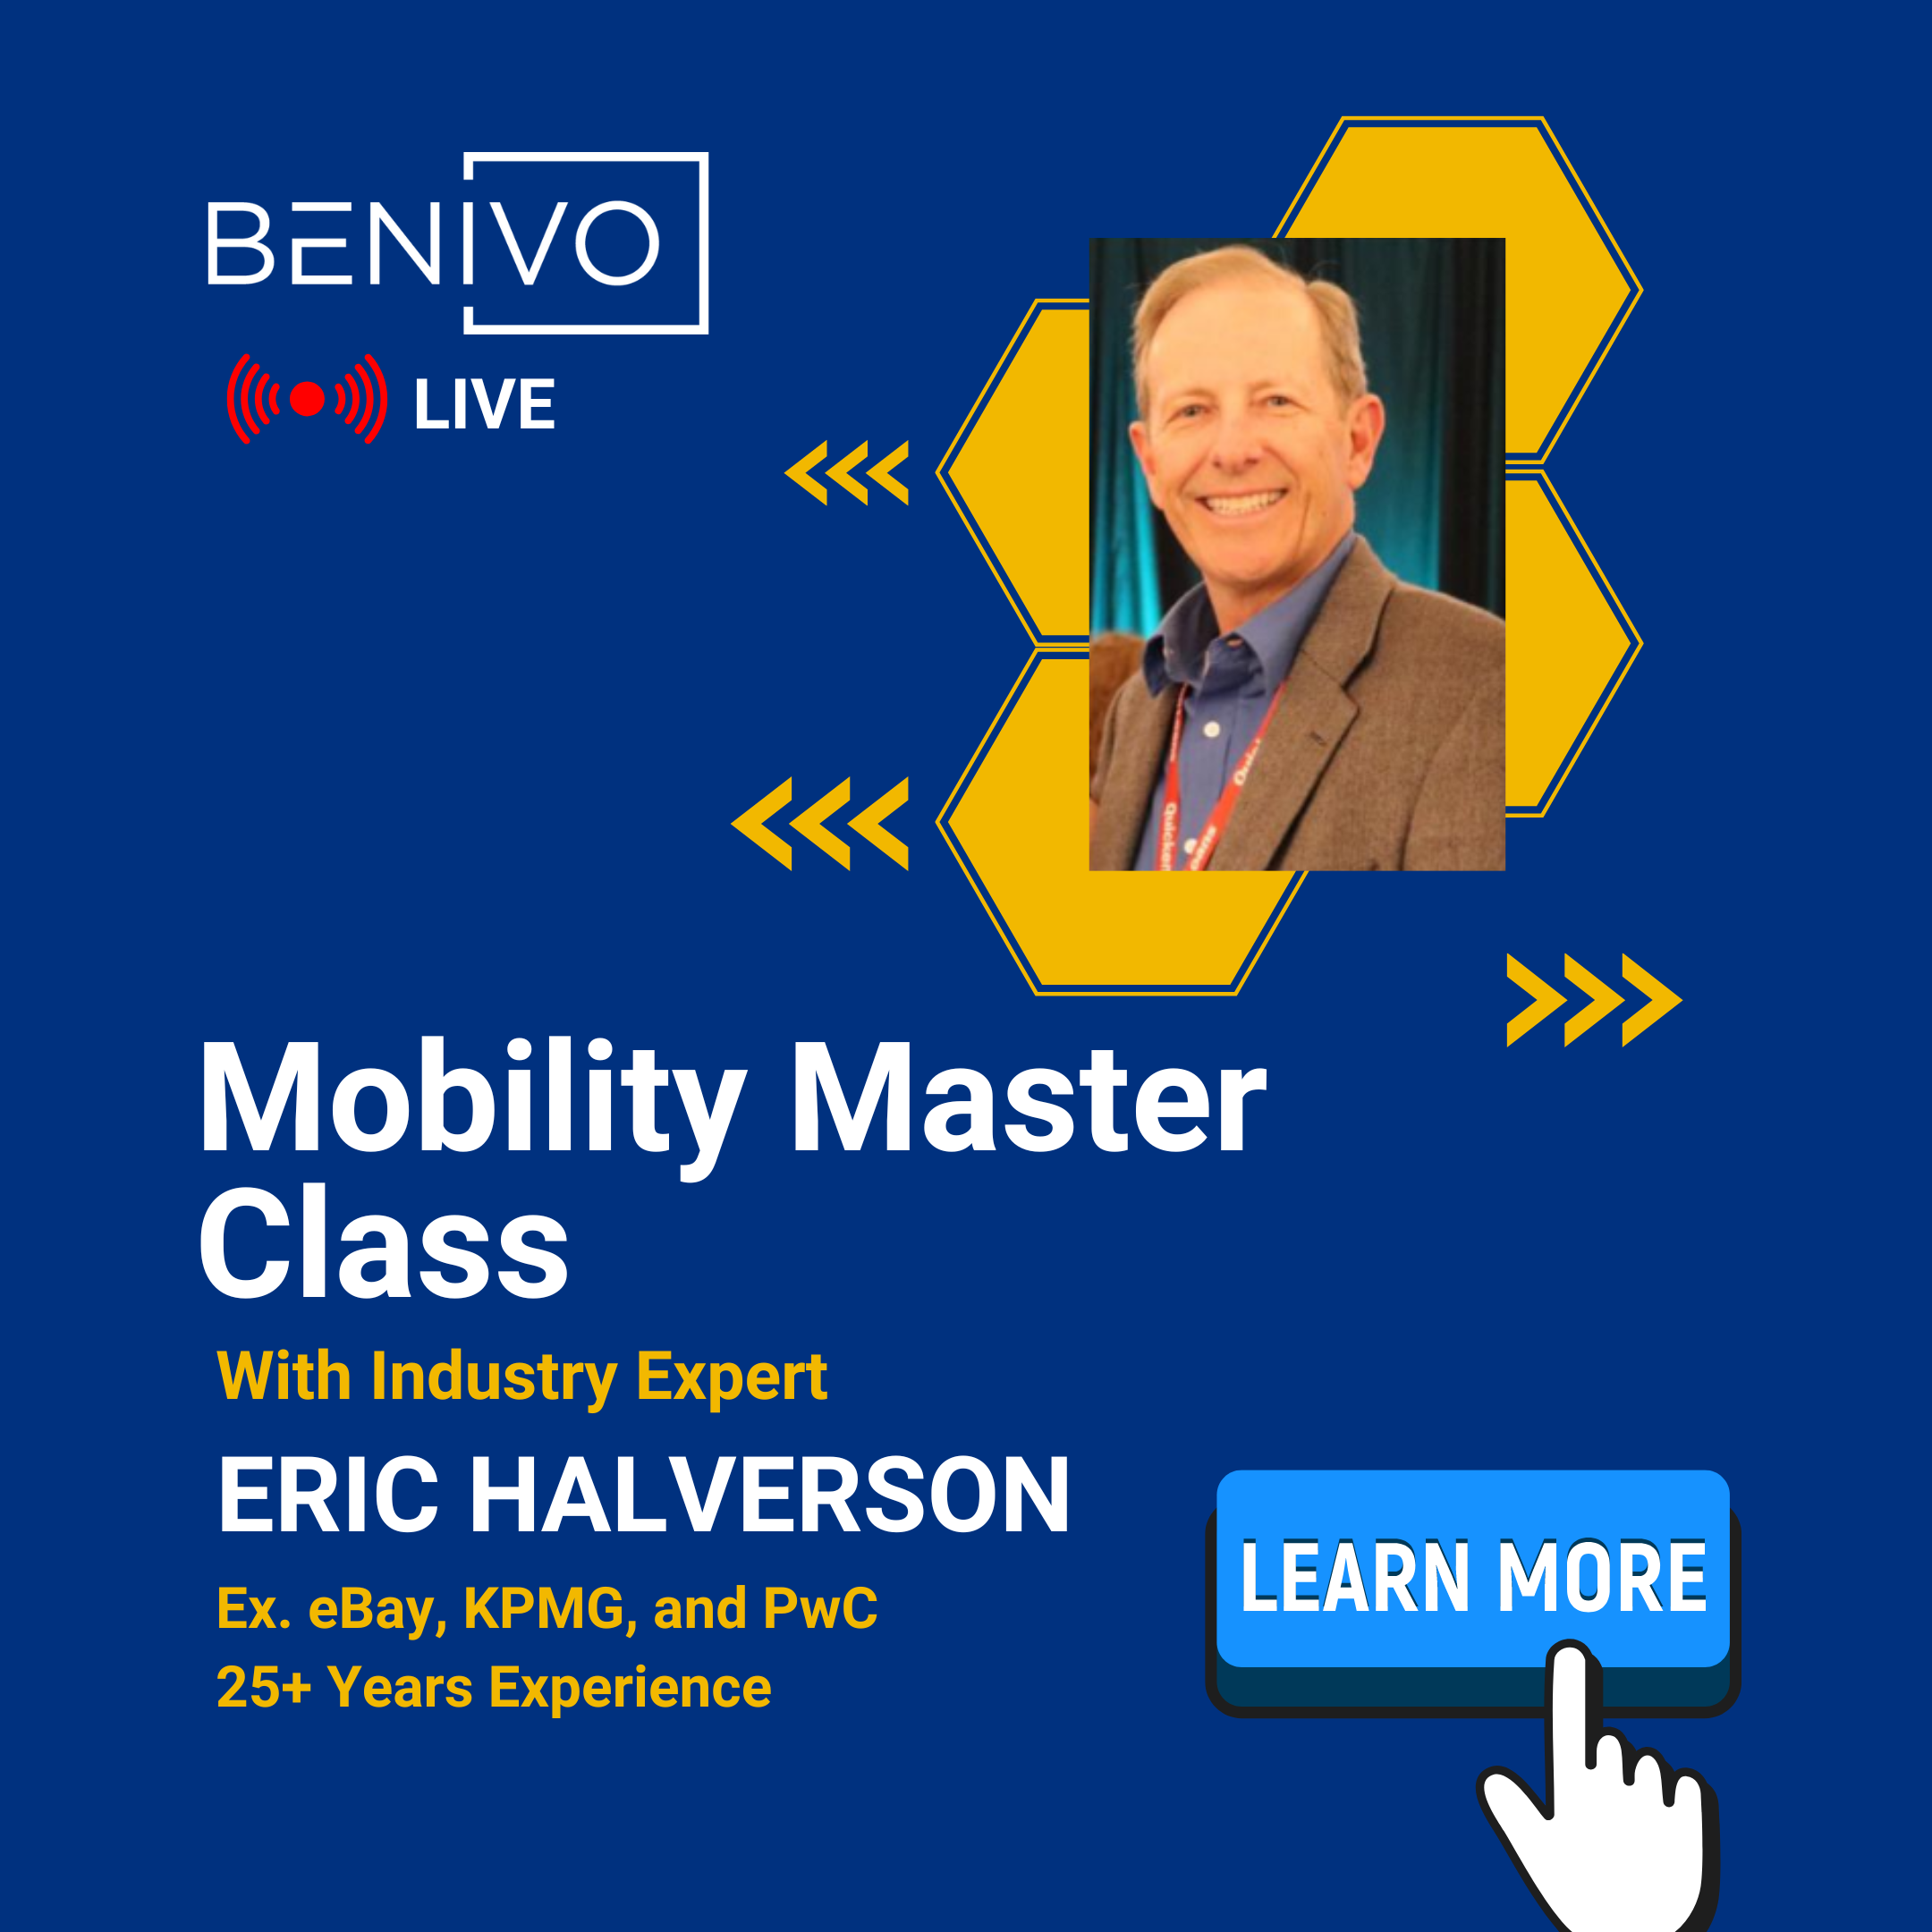 New Mobility Master Class with Industry Expert Eric Halverson